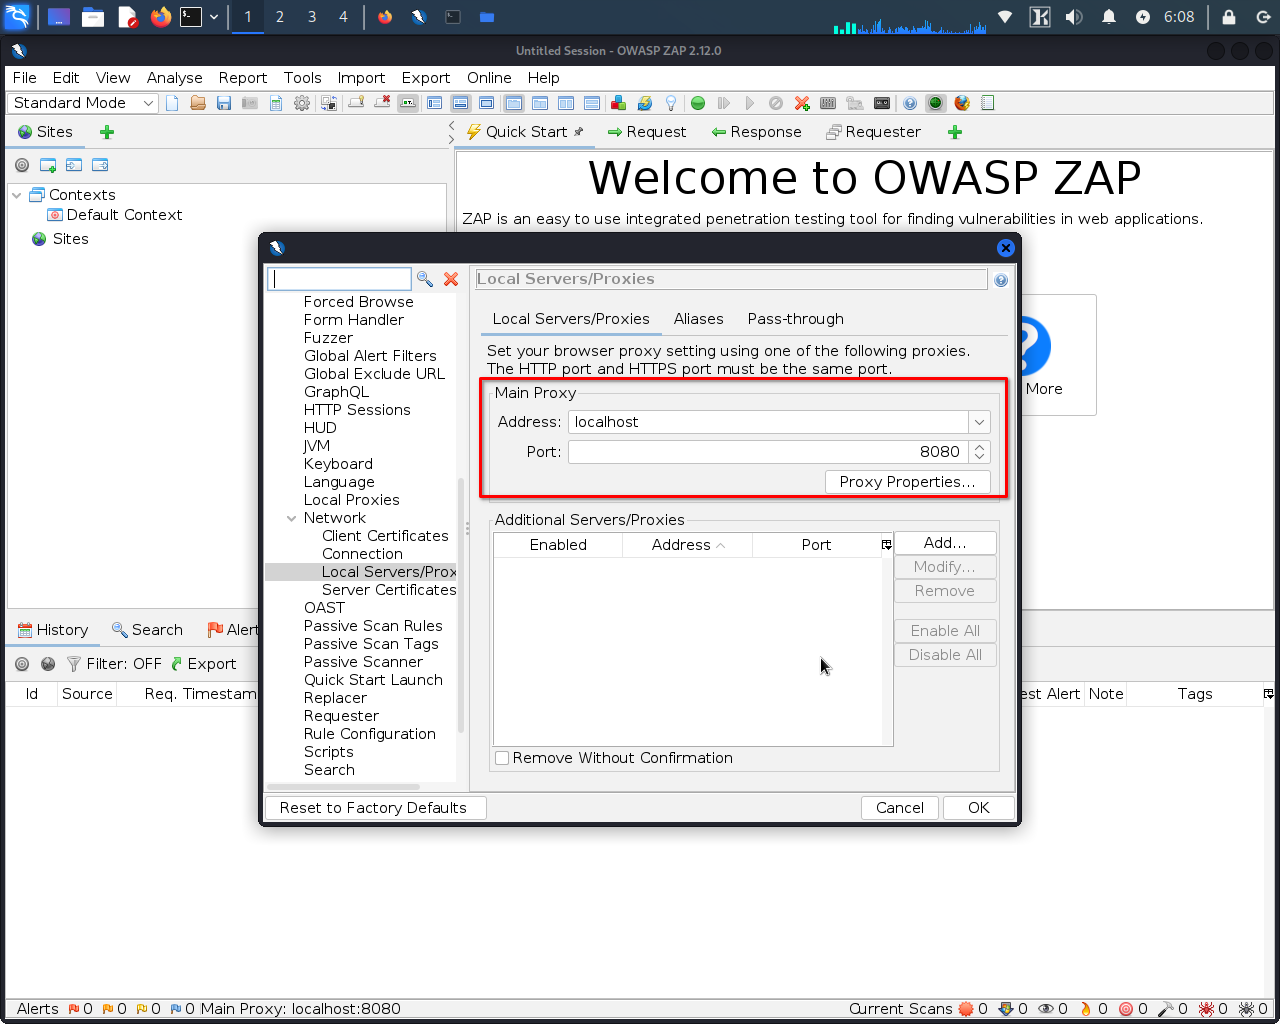 How to configure owasp zap on linux